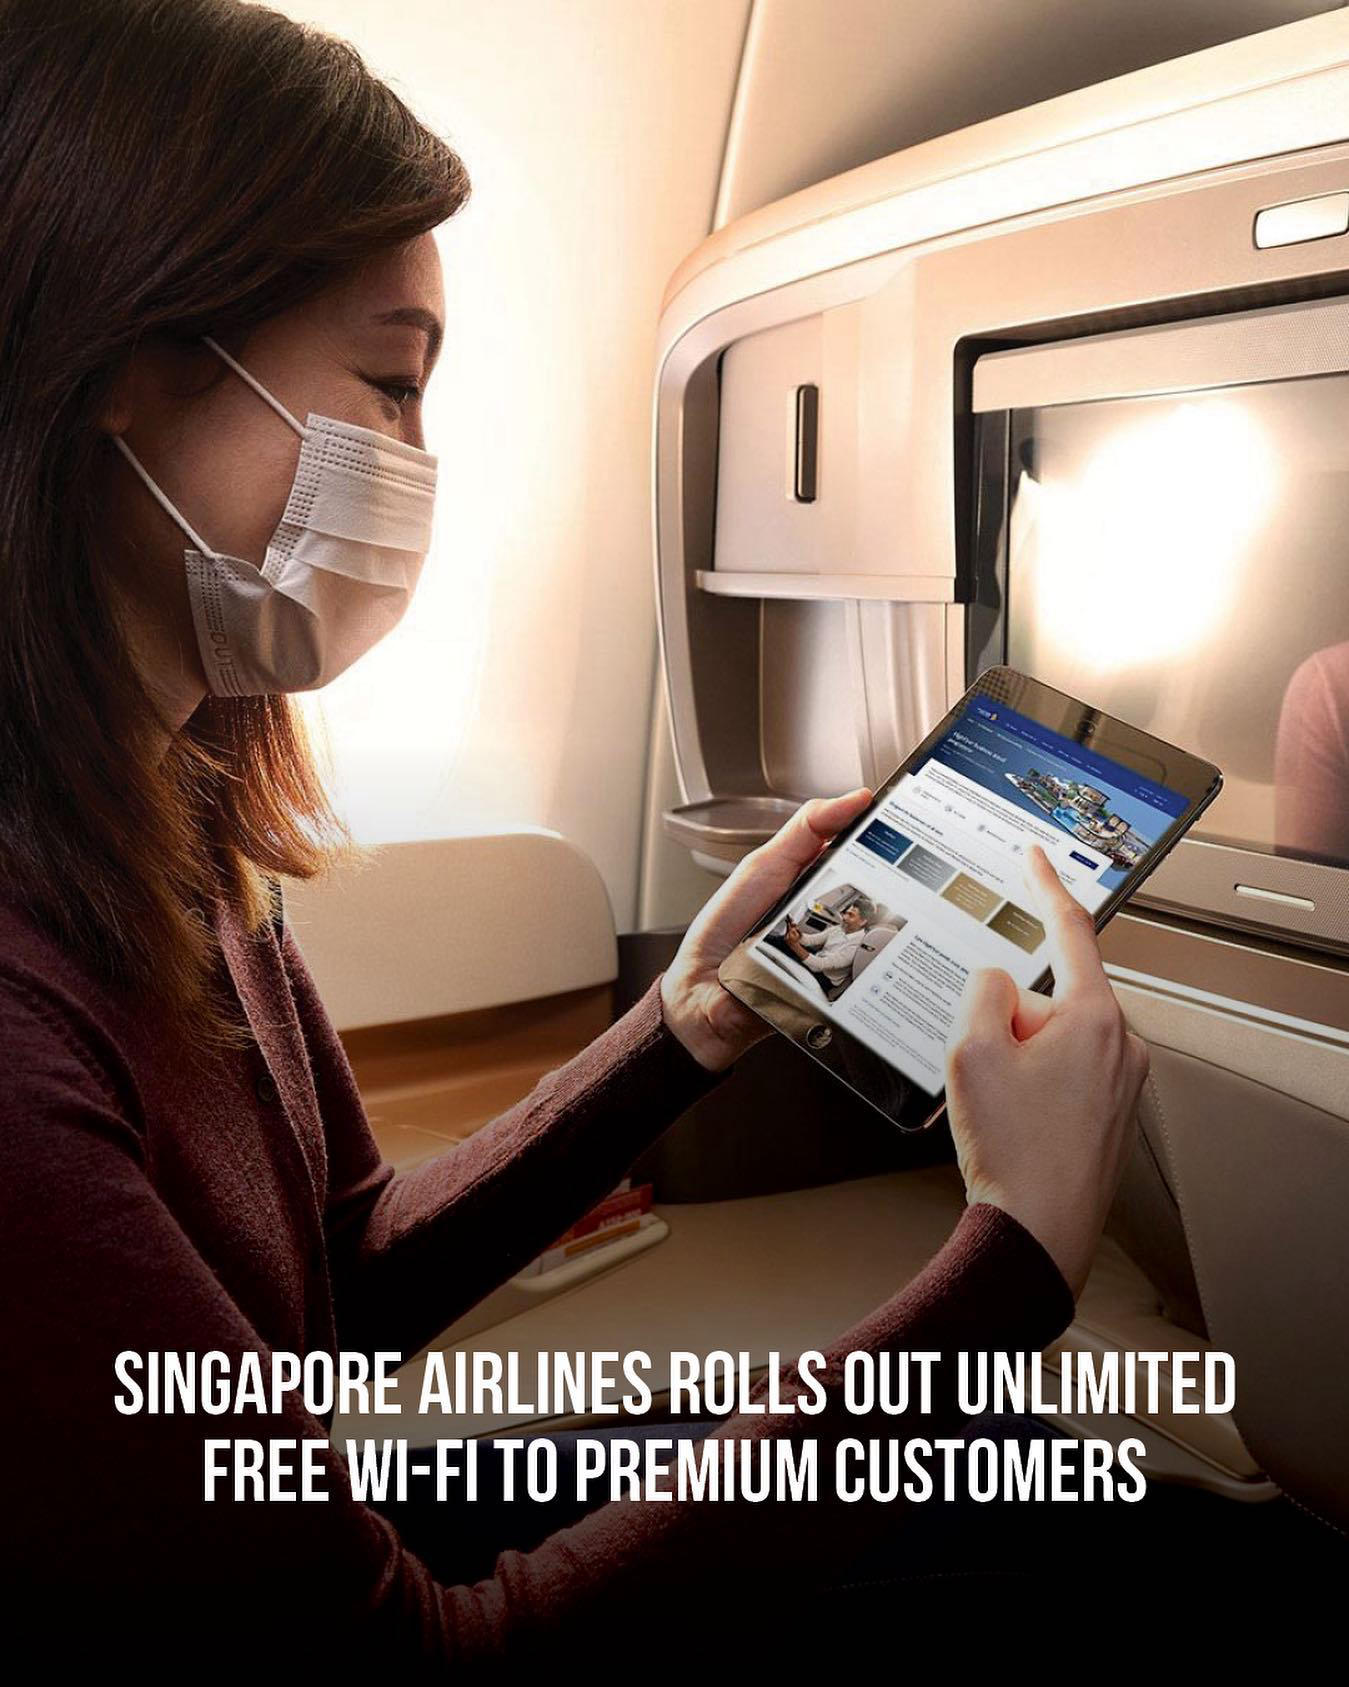 Free unlimited Wi-Fi has been rolled out to Singapore Airline business class and loyalty programme c